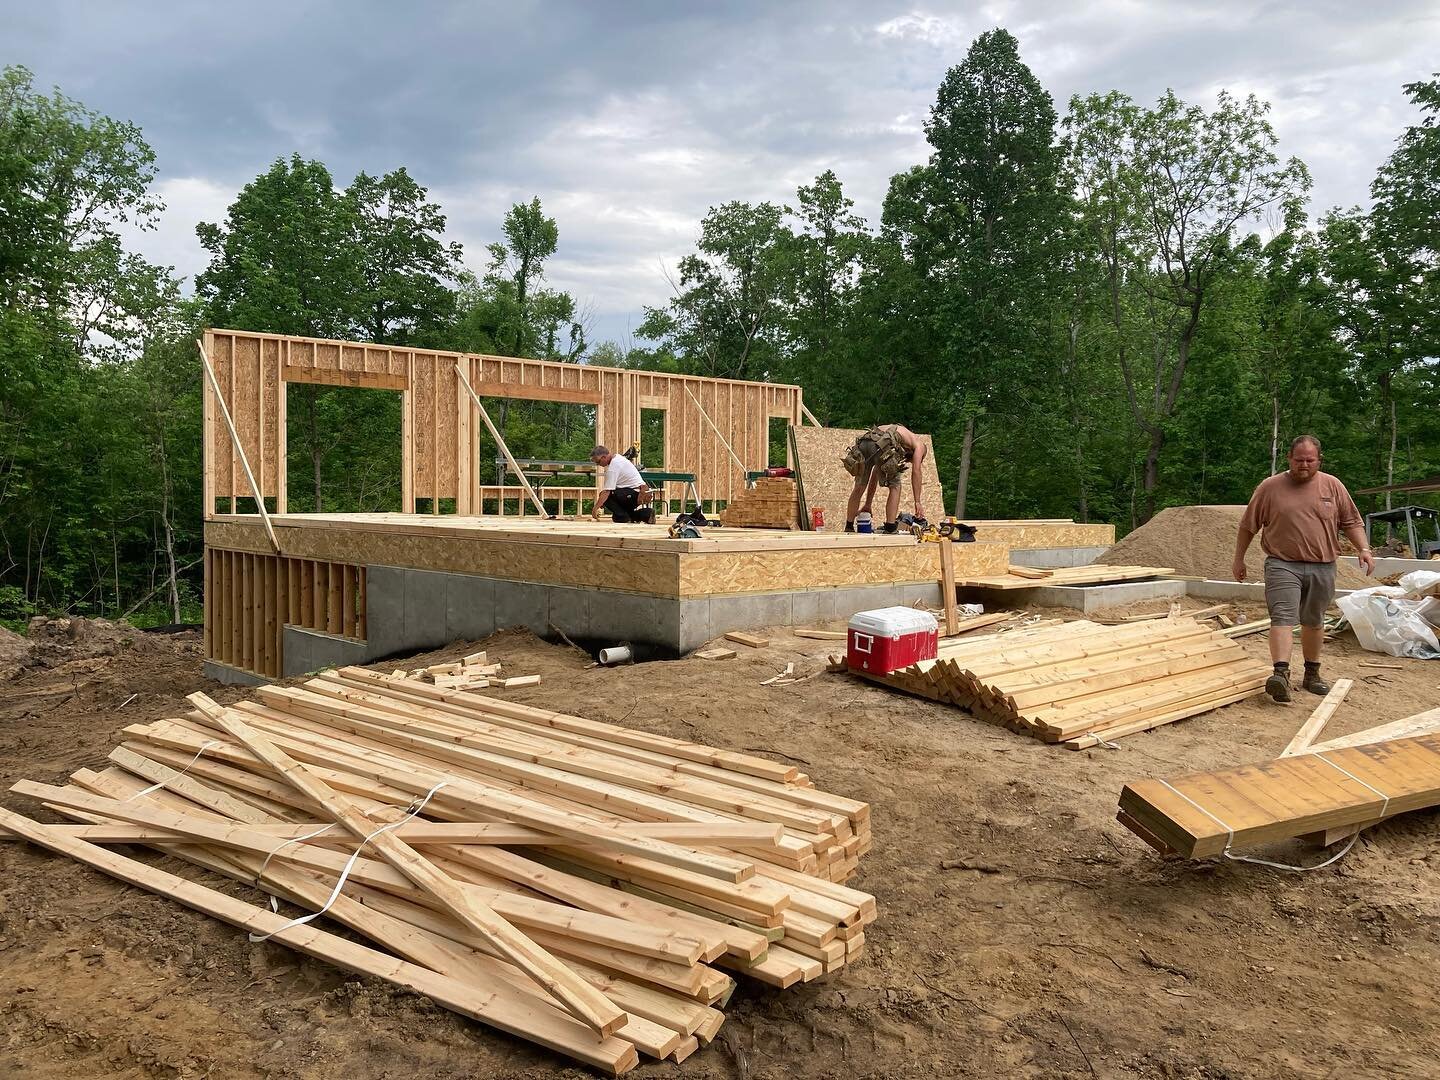 Framing is well under way! By next week this thing should be ready for a roof! 

#framing #newconstruction #wallup #flannelhomes